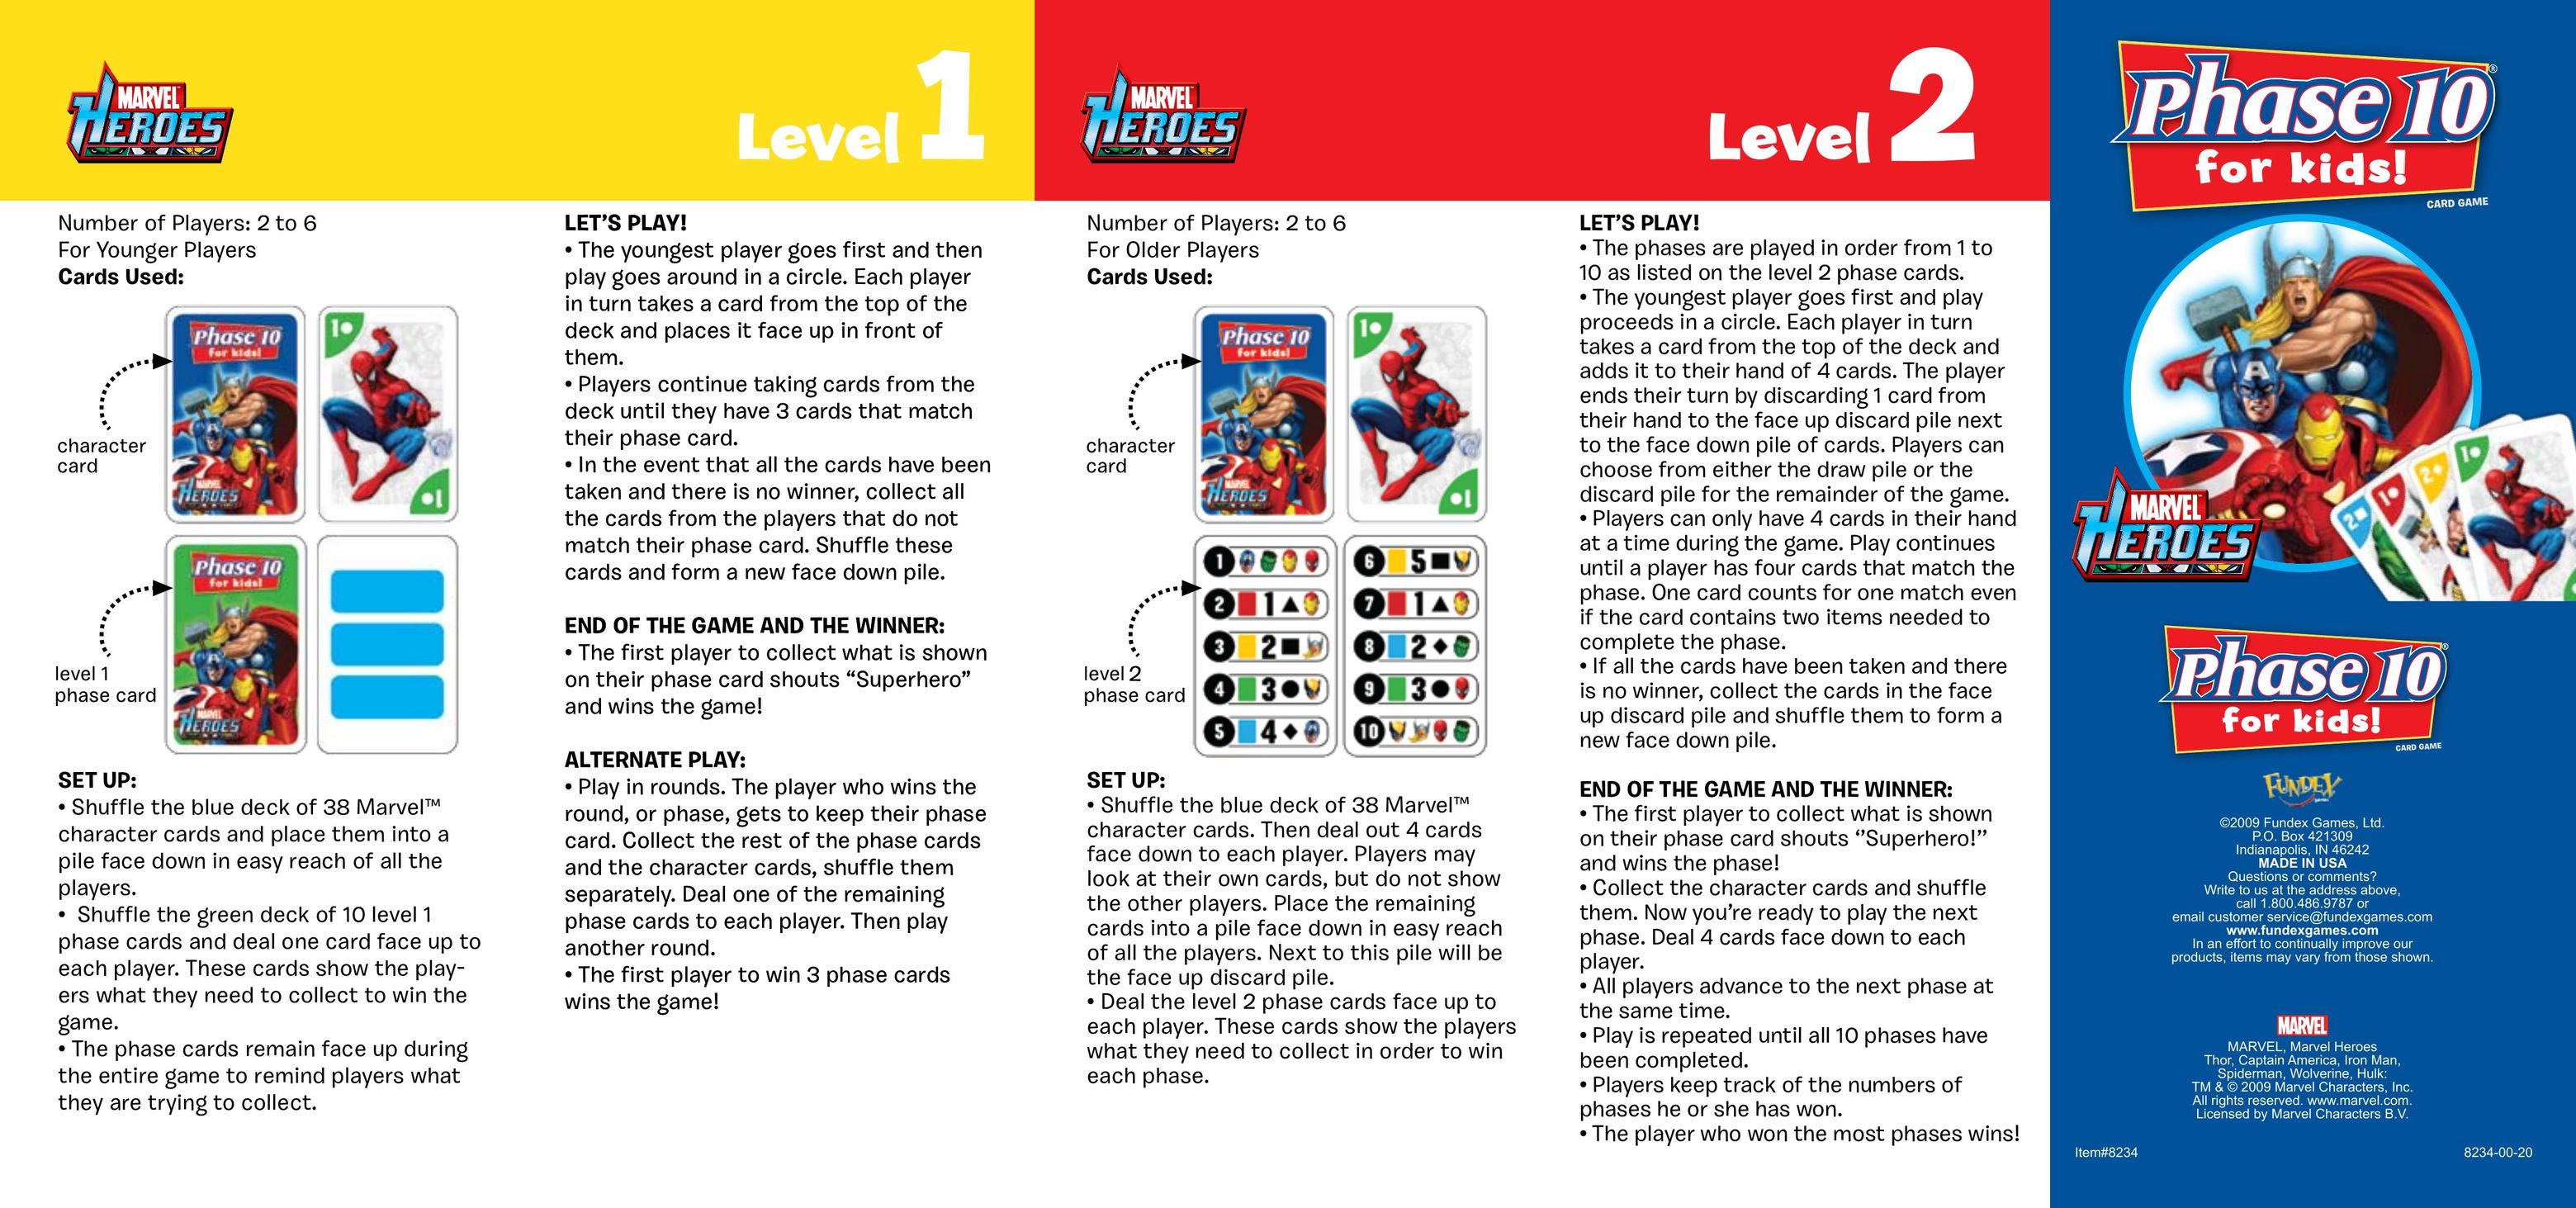 Fundex Games Phase 10 for Kids Board Games User Manual